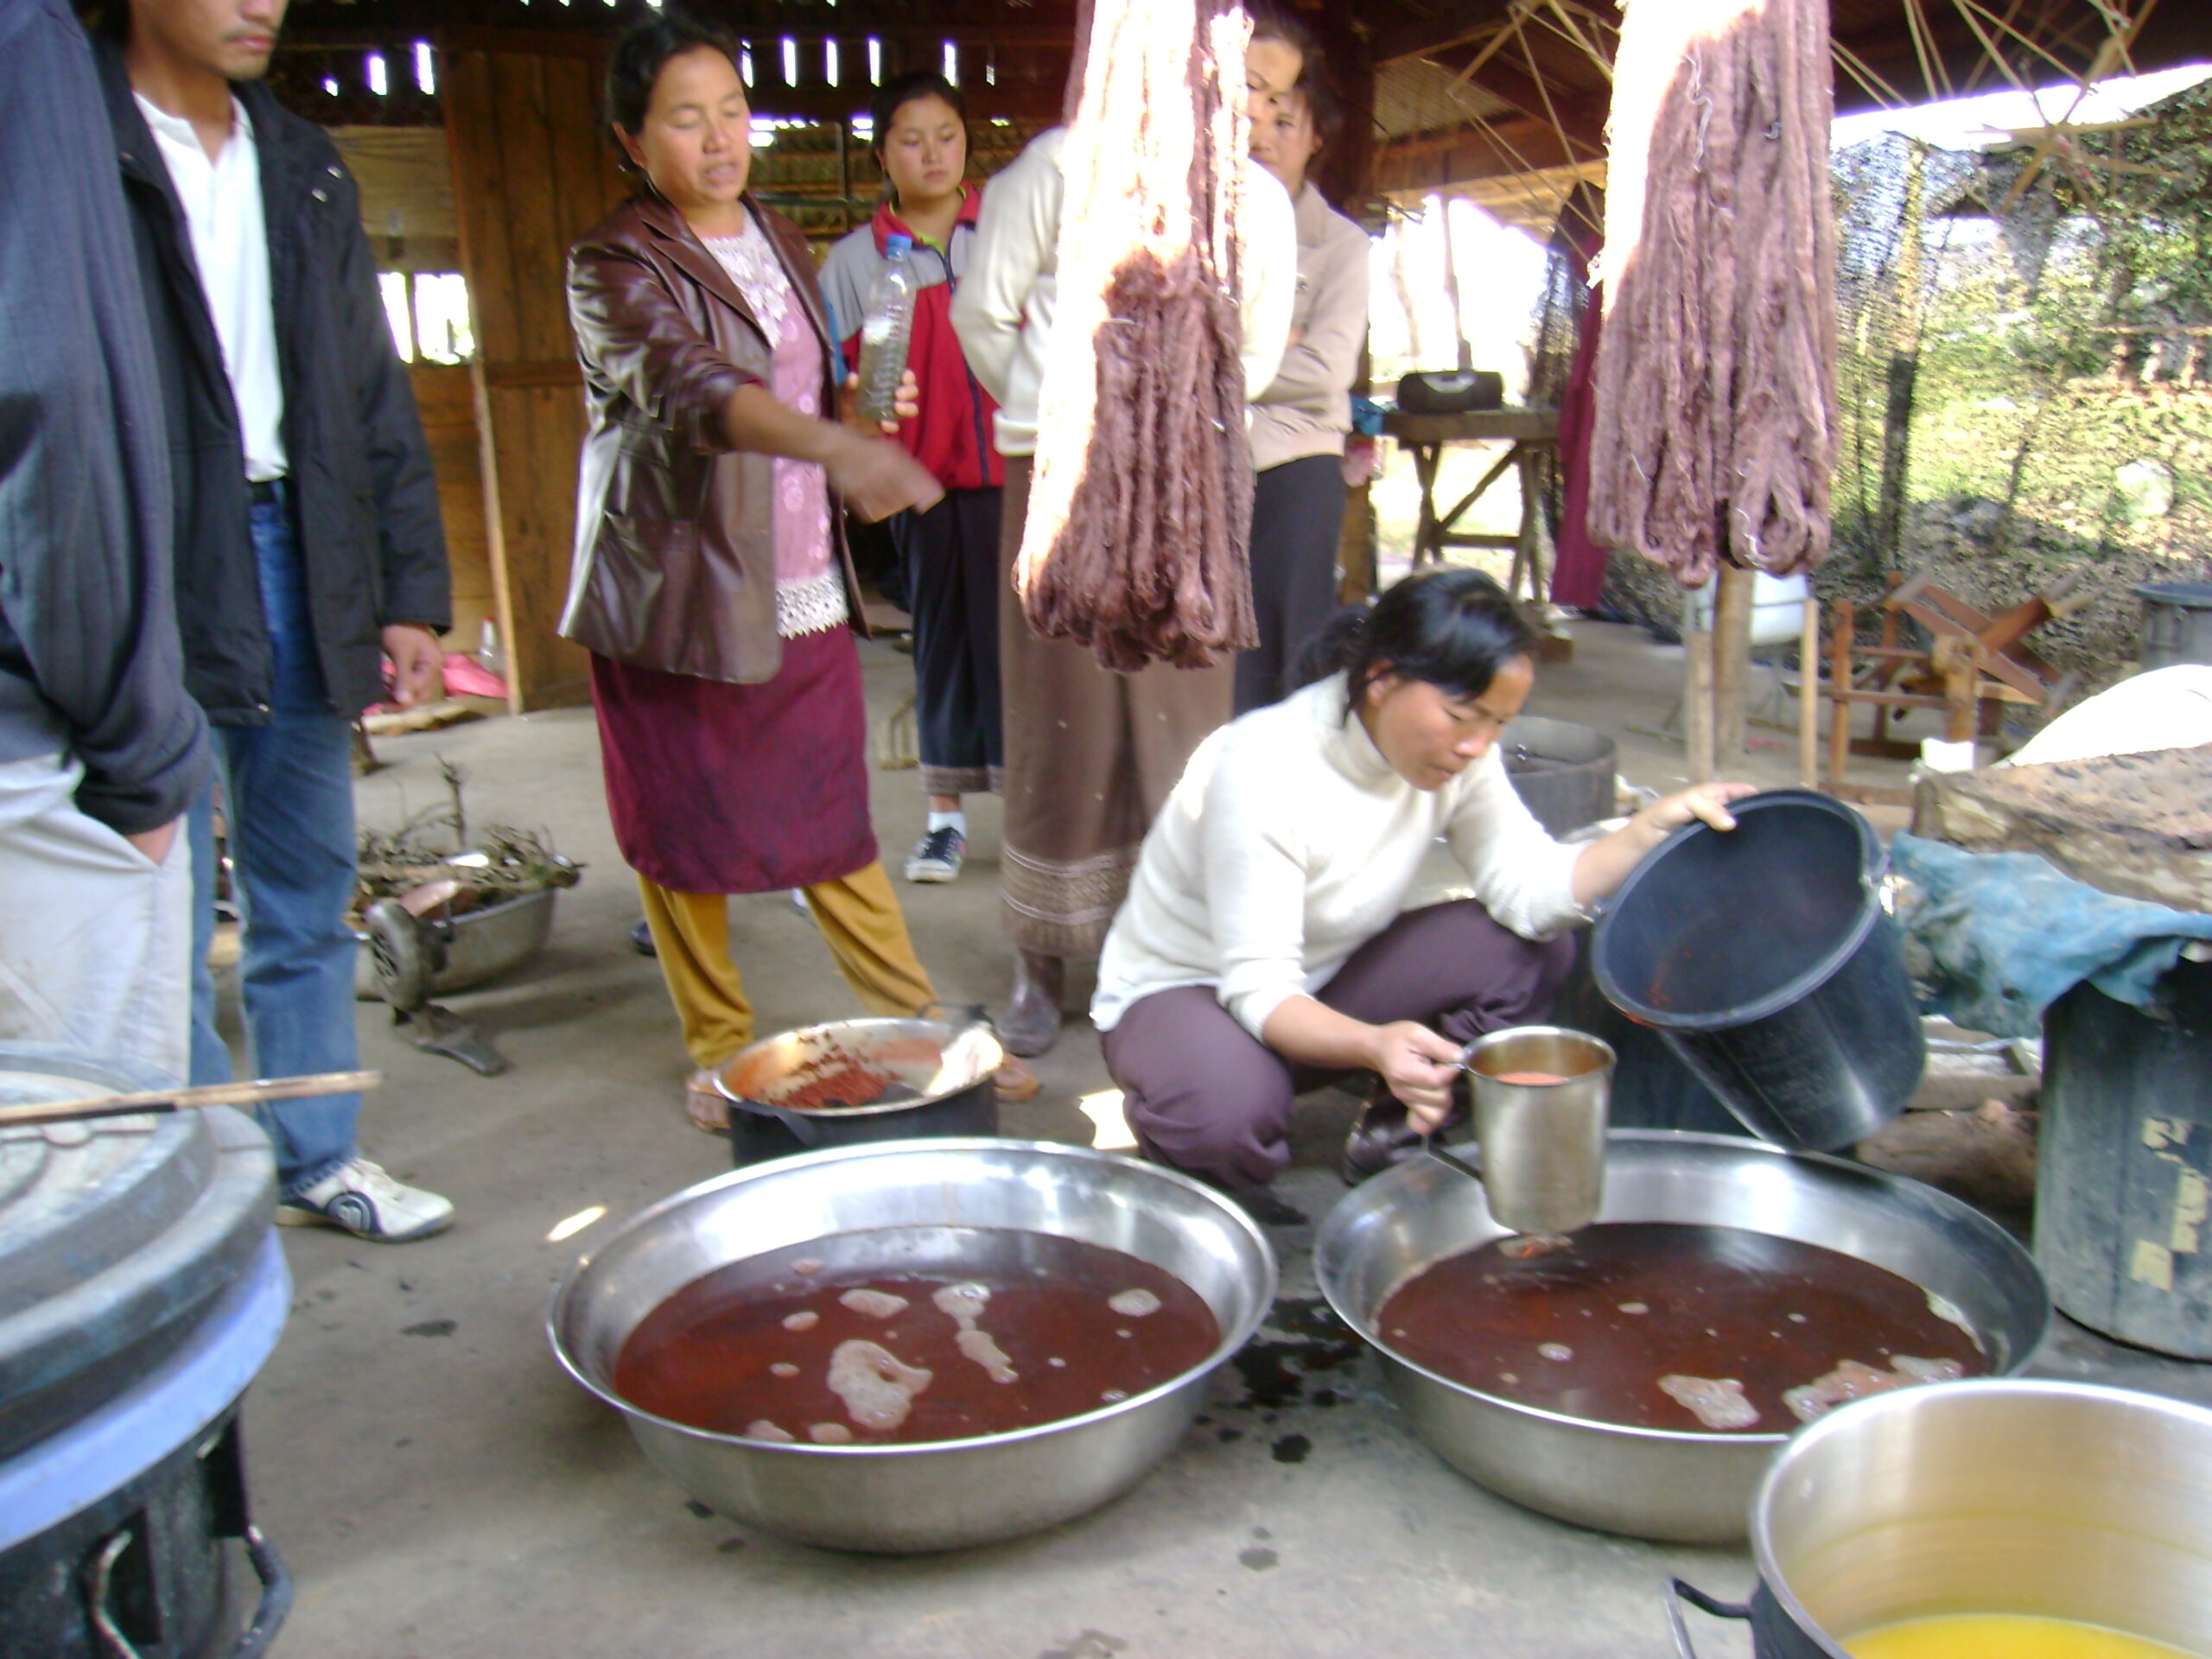 Dyers preparing red silk. Red dye is from the secretion of a scale bug that is called "lac."